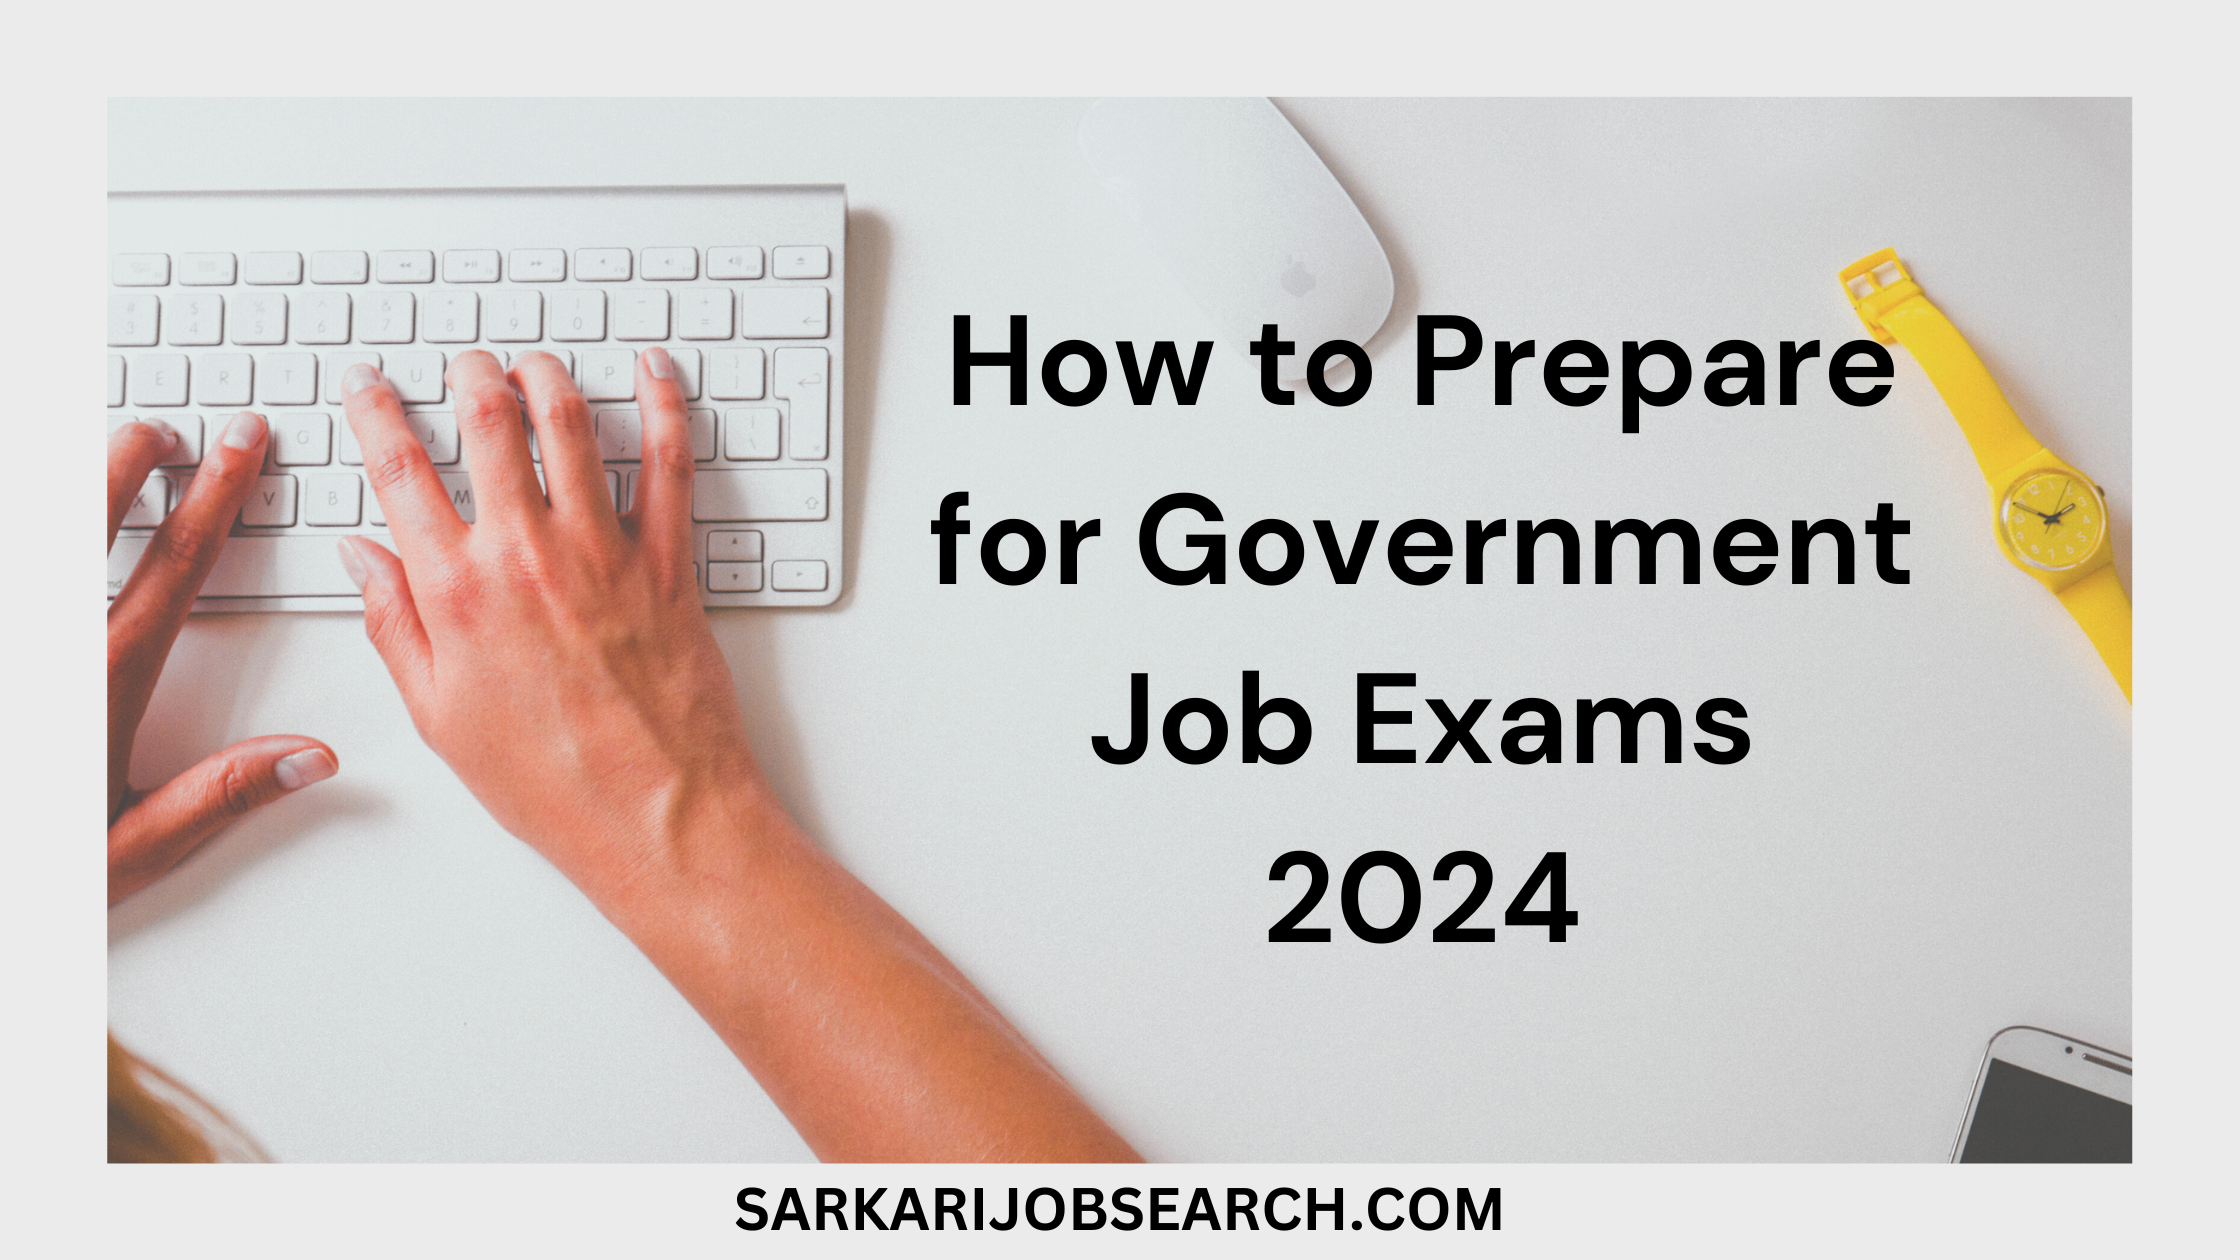 How to Prepare for Government Job Exams 2024 | Tips and Strategies